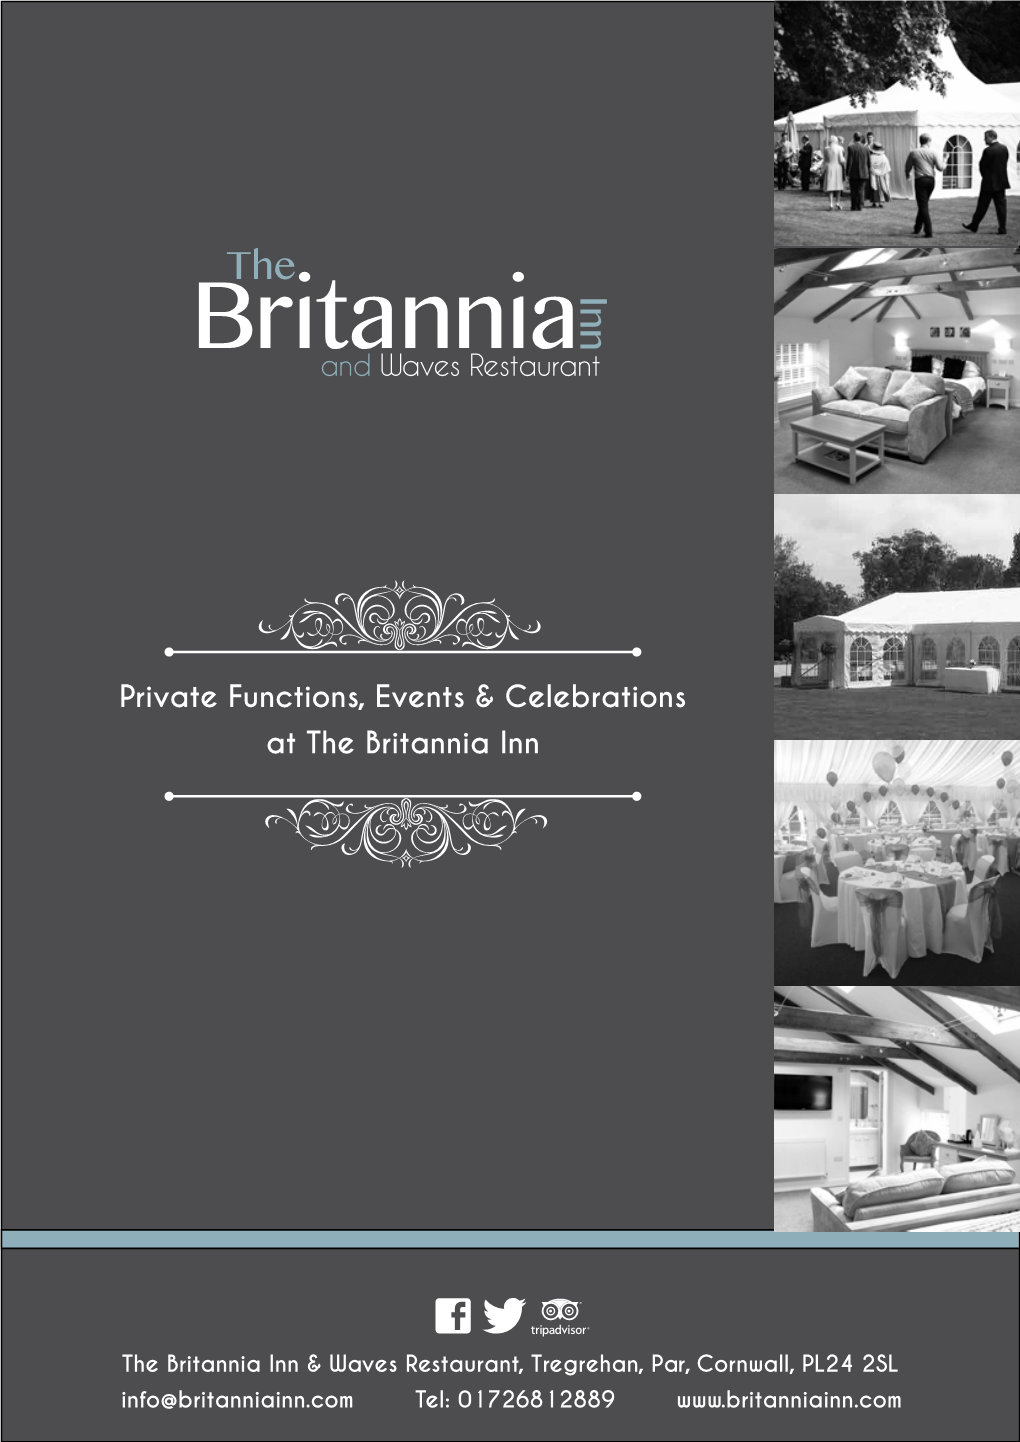 Private Functions, Events & Celebrations at the Britannia